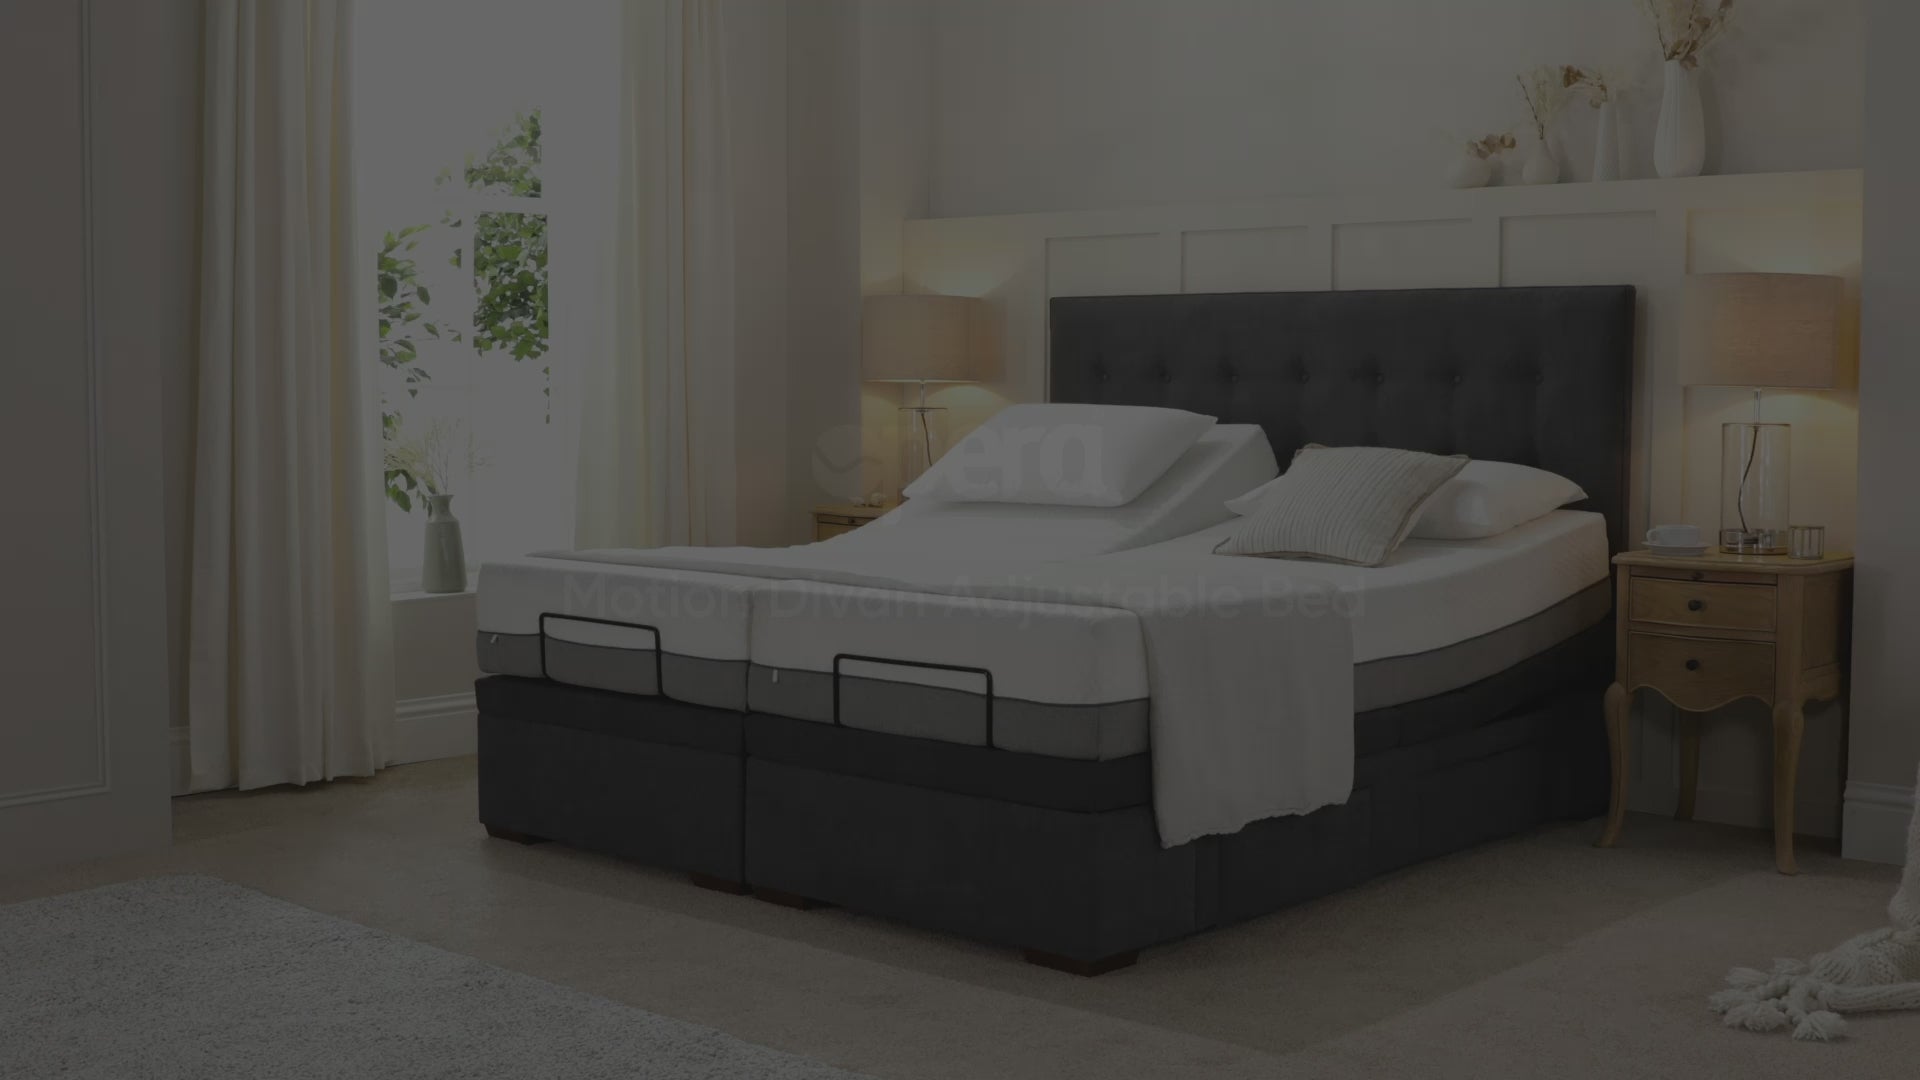 A video containing information about the motion divan adjustable bed